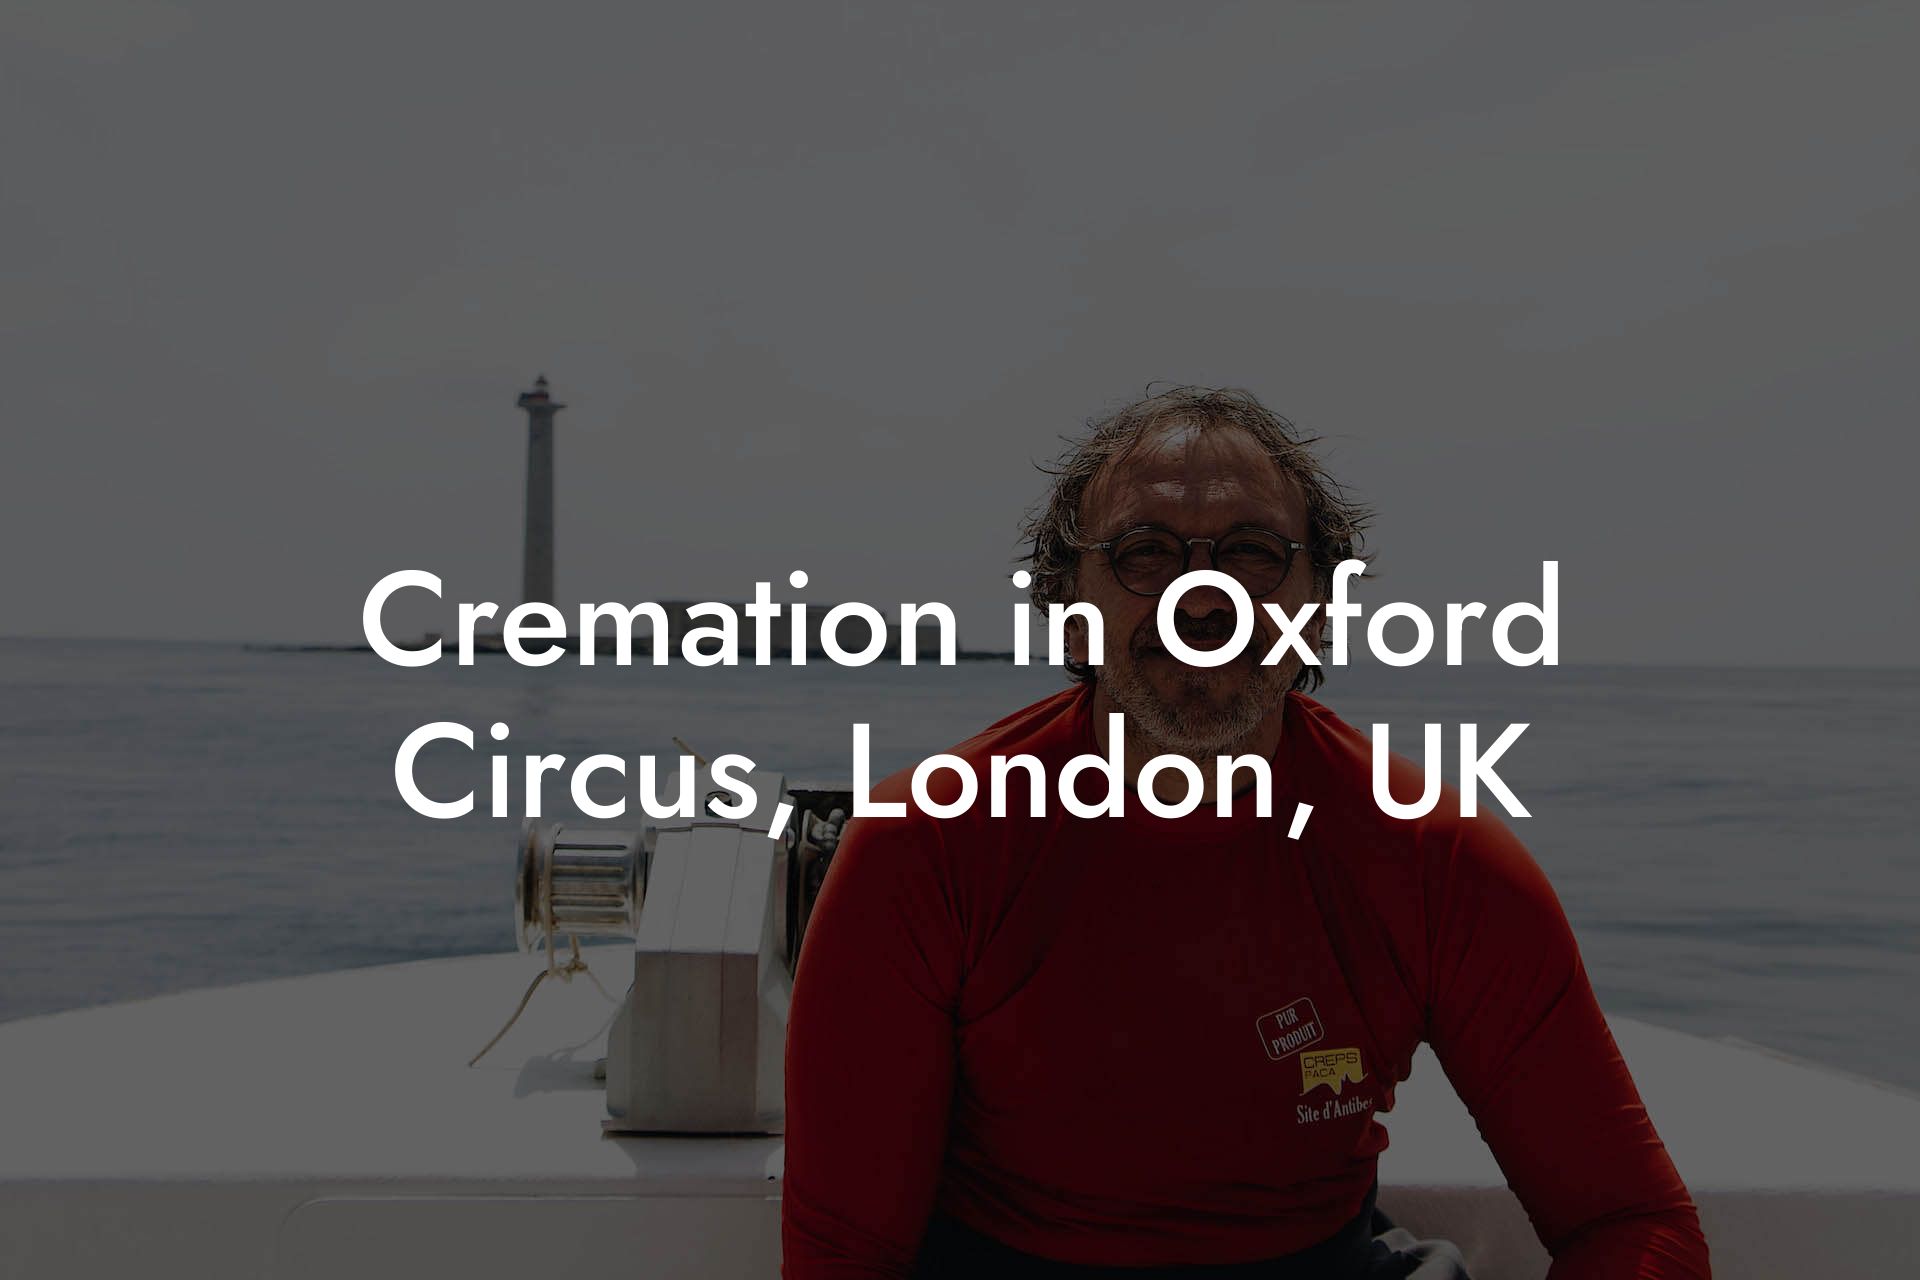 Cremation in Oxford Circus, London, UK